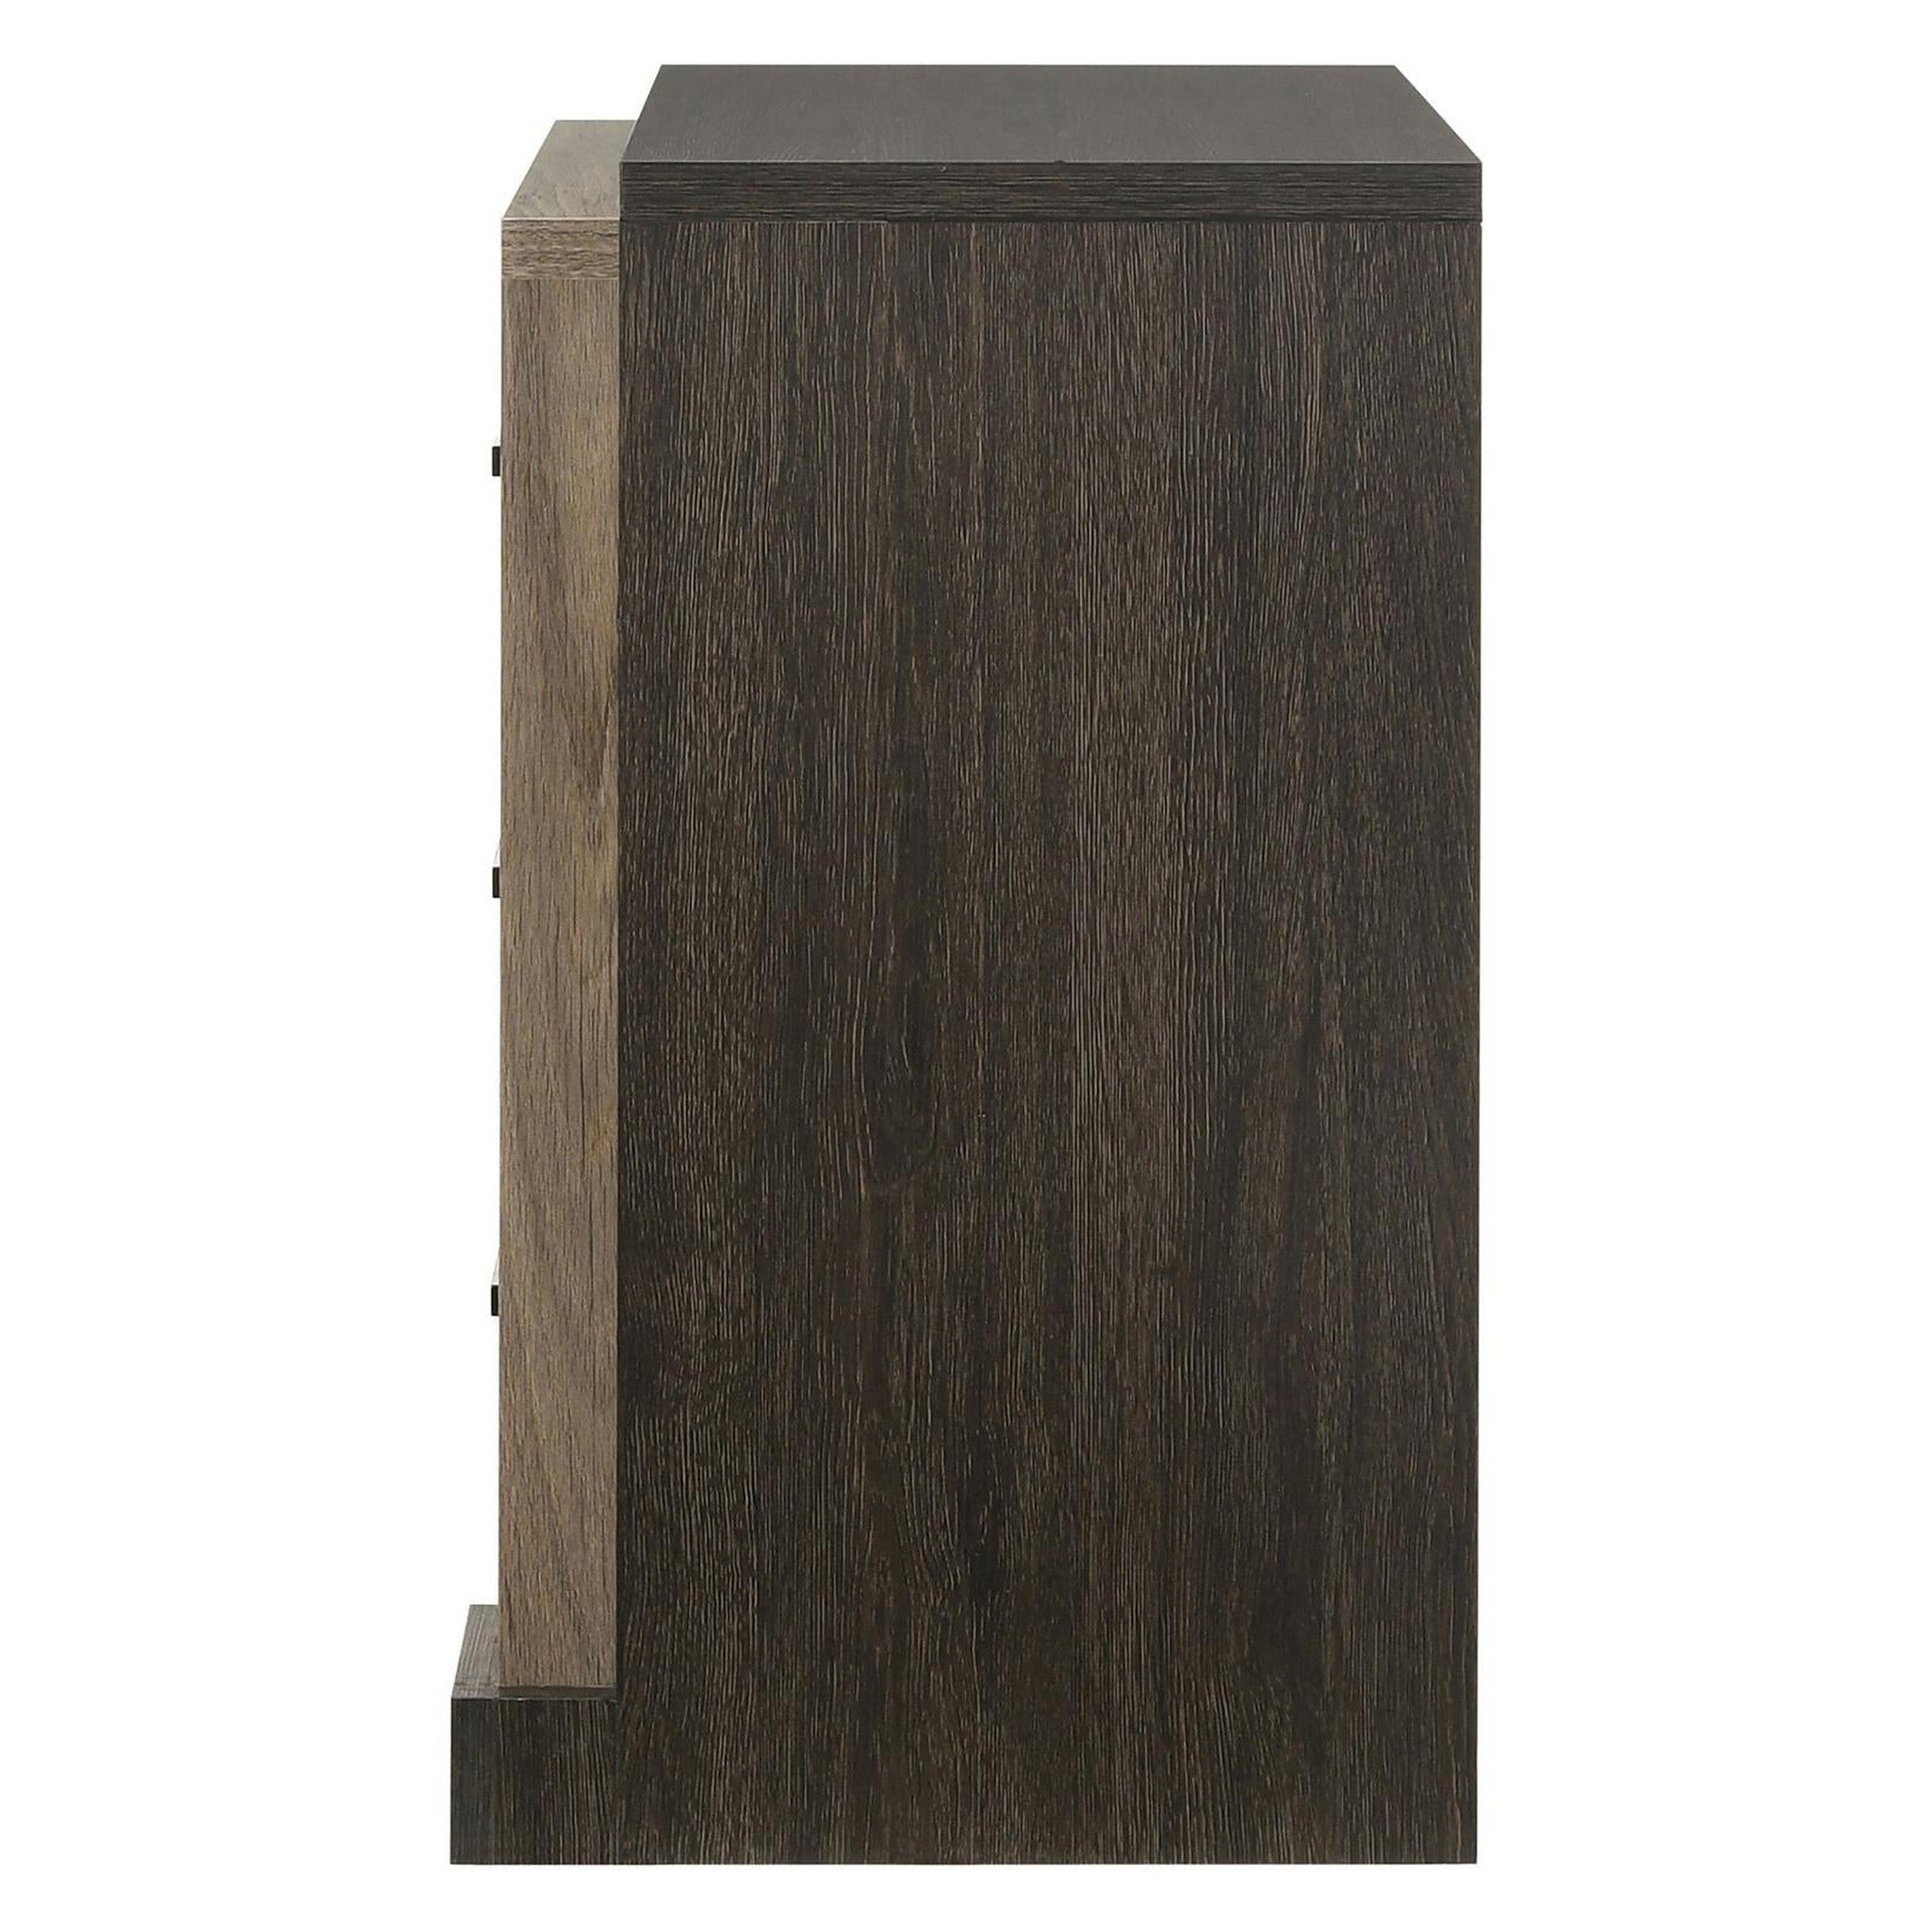 Baker 3-drawer Nightstand Brown and Light Taupe 224462